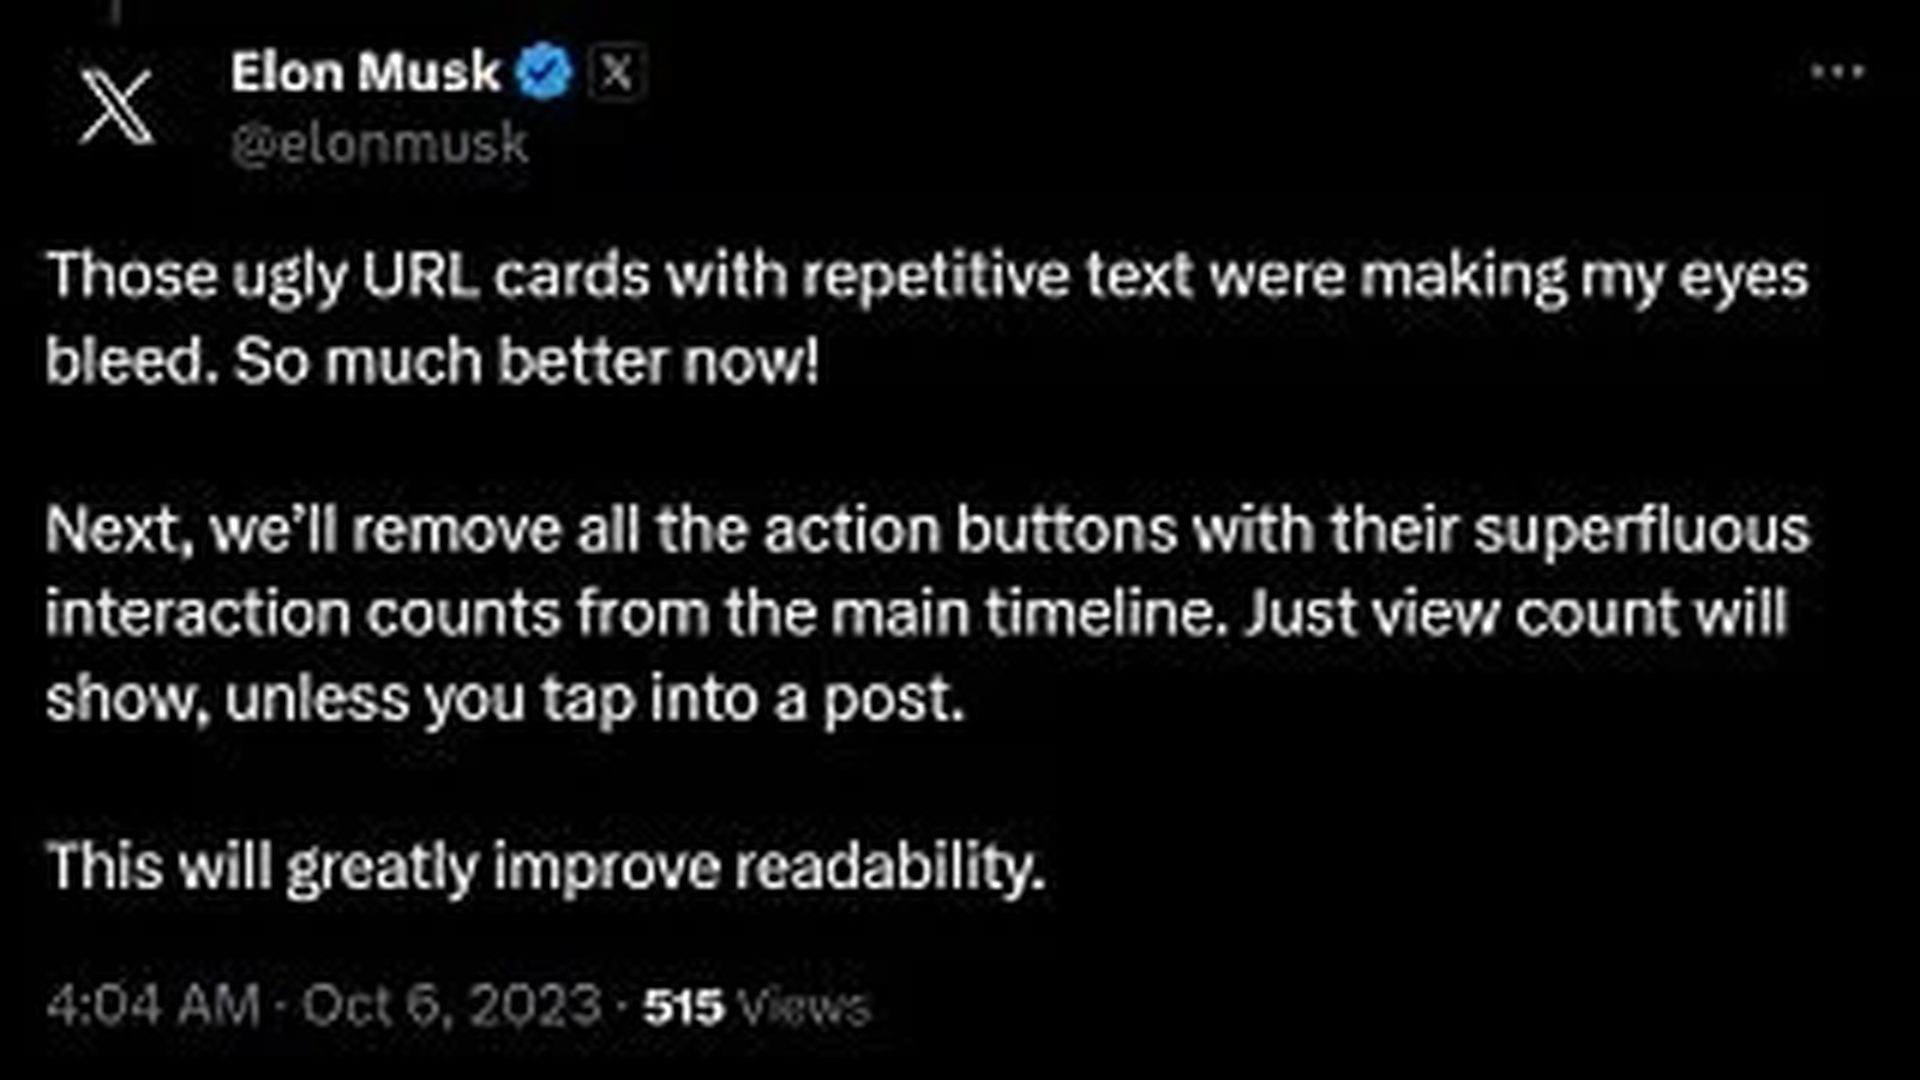 Elon Musk wants to hide likes and retweets on X